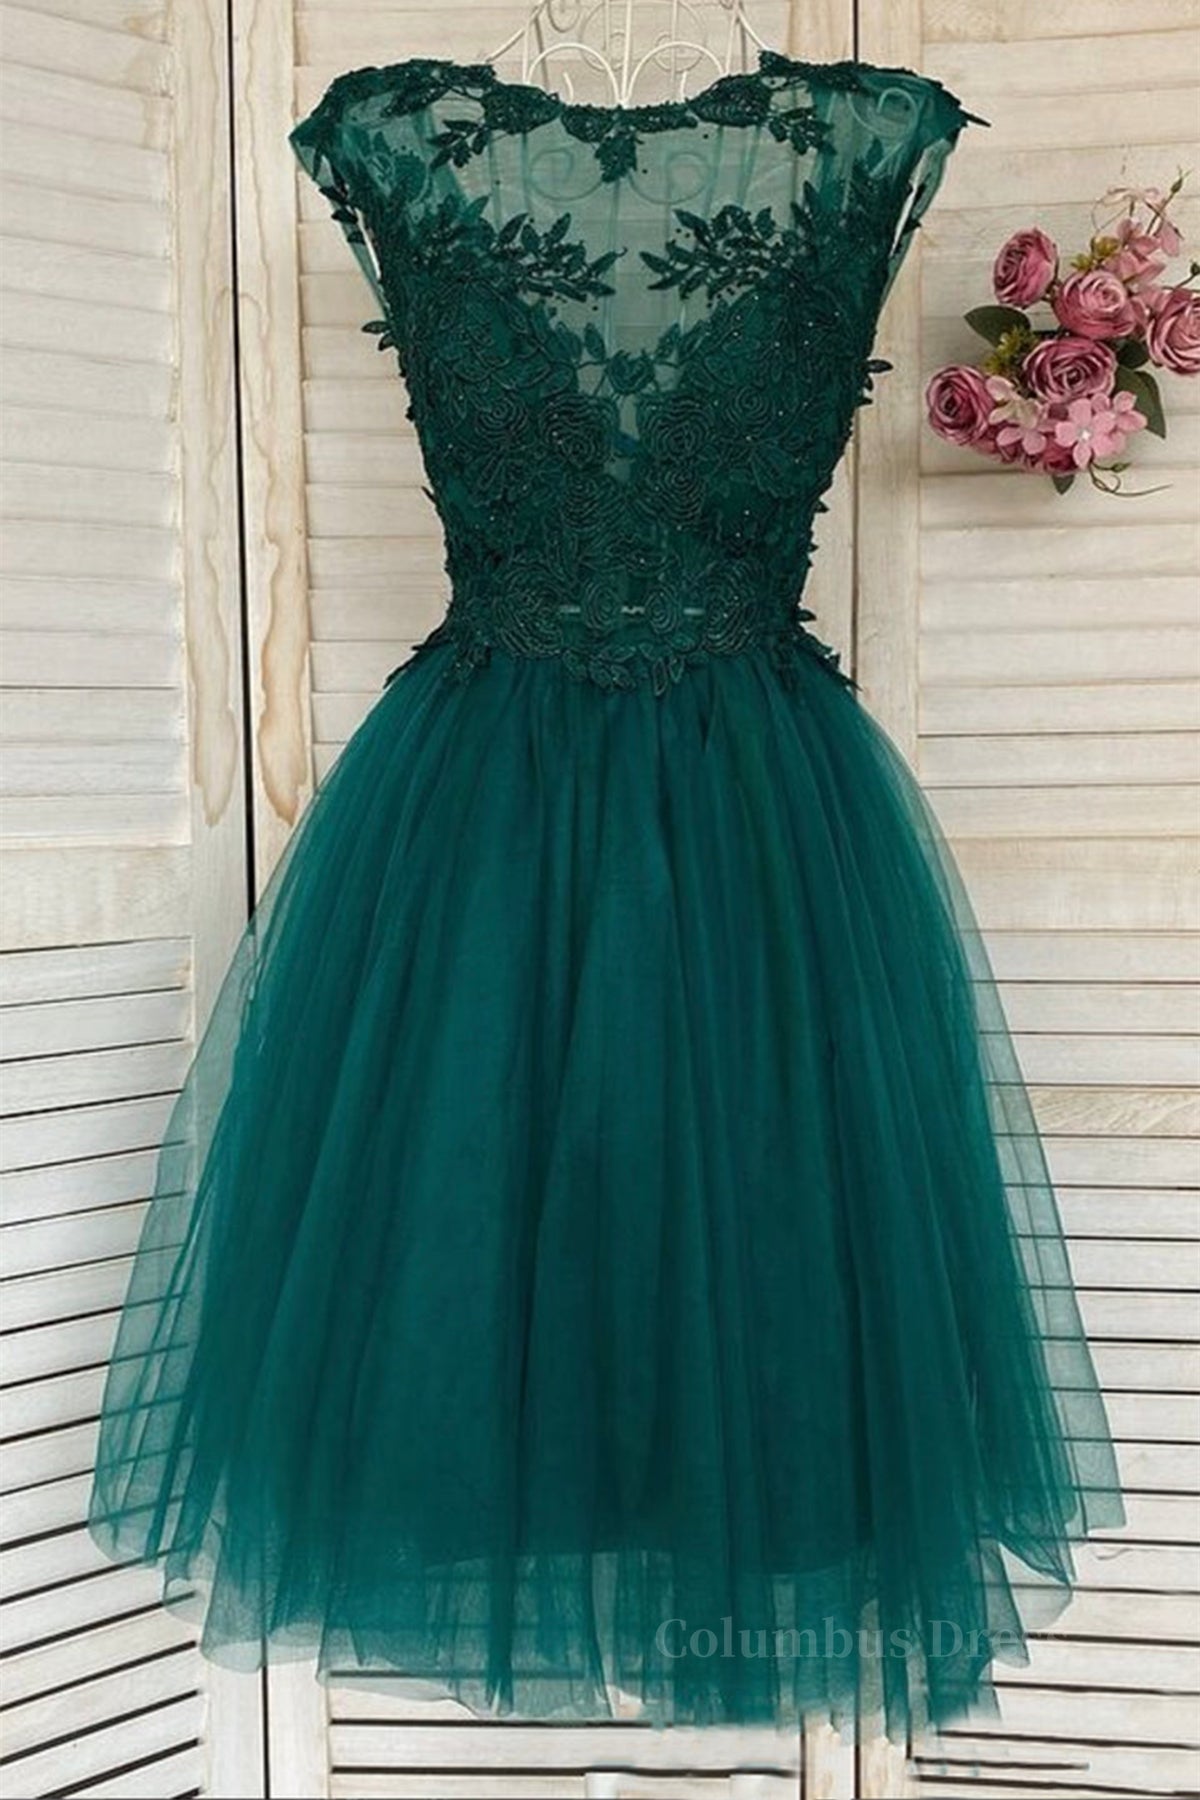 Formal Dresses Size 17, Green Lace Tulle Short Prom Homecoming Dresses, Green Lace Formal Graduation Evening Dresses